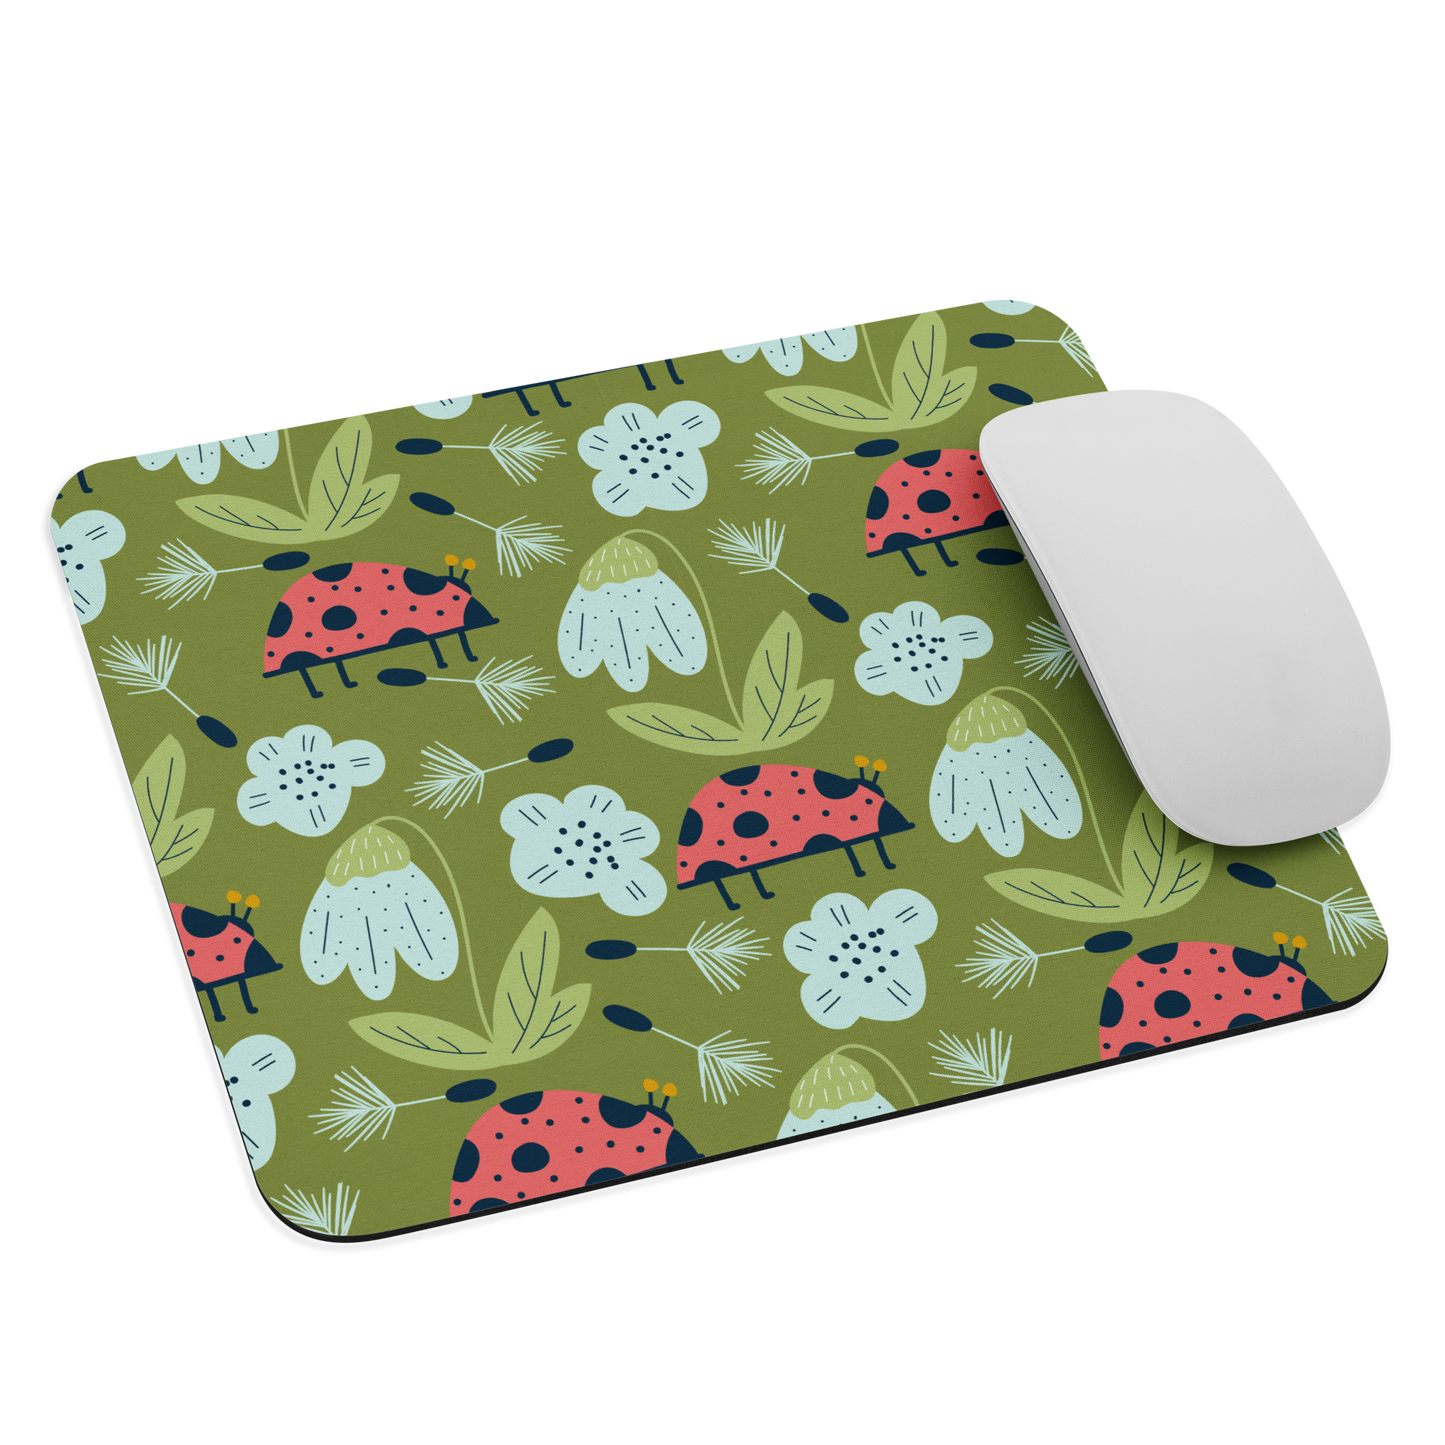 Scandinavian Spring Floral | Seamless Patterns | Mouse Pad - #5